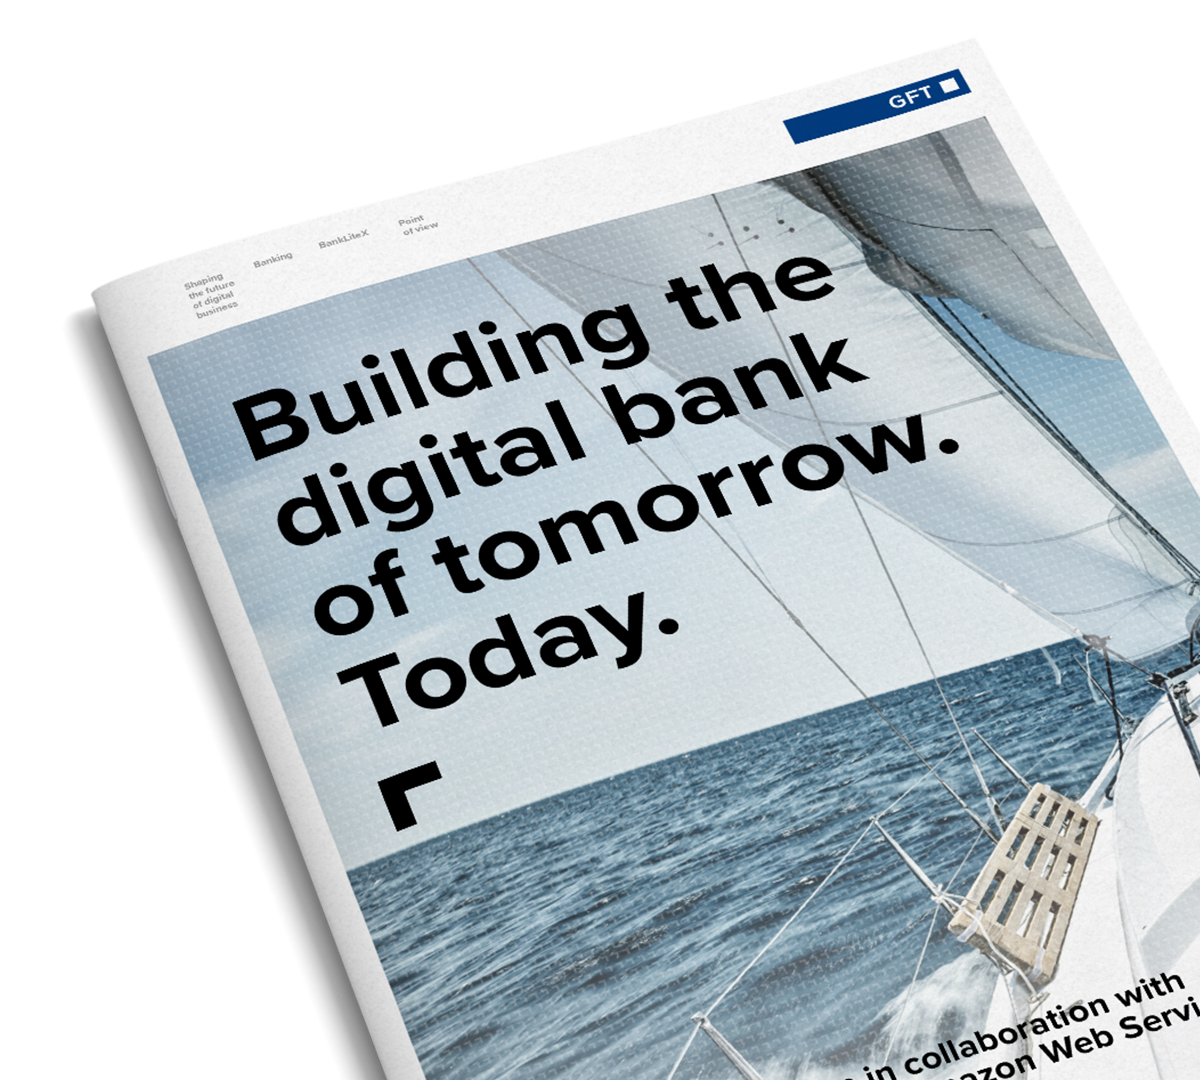 How to get into digital banking quickly and safely whether you’re a startup or an established bank.